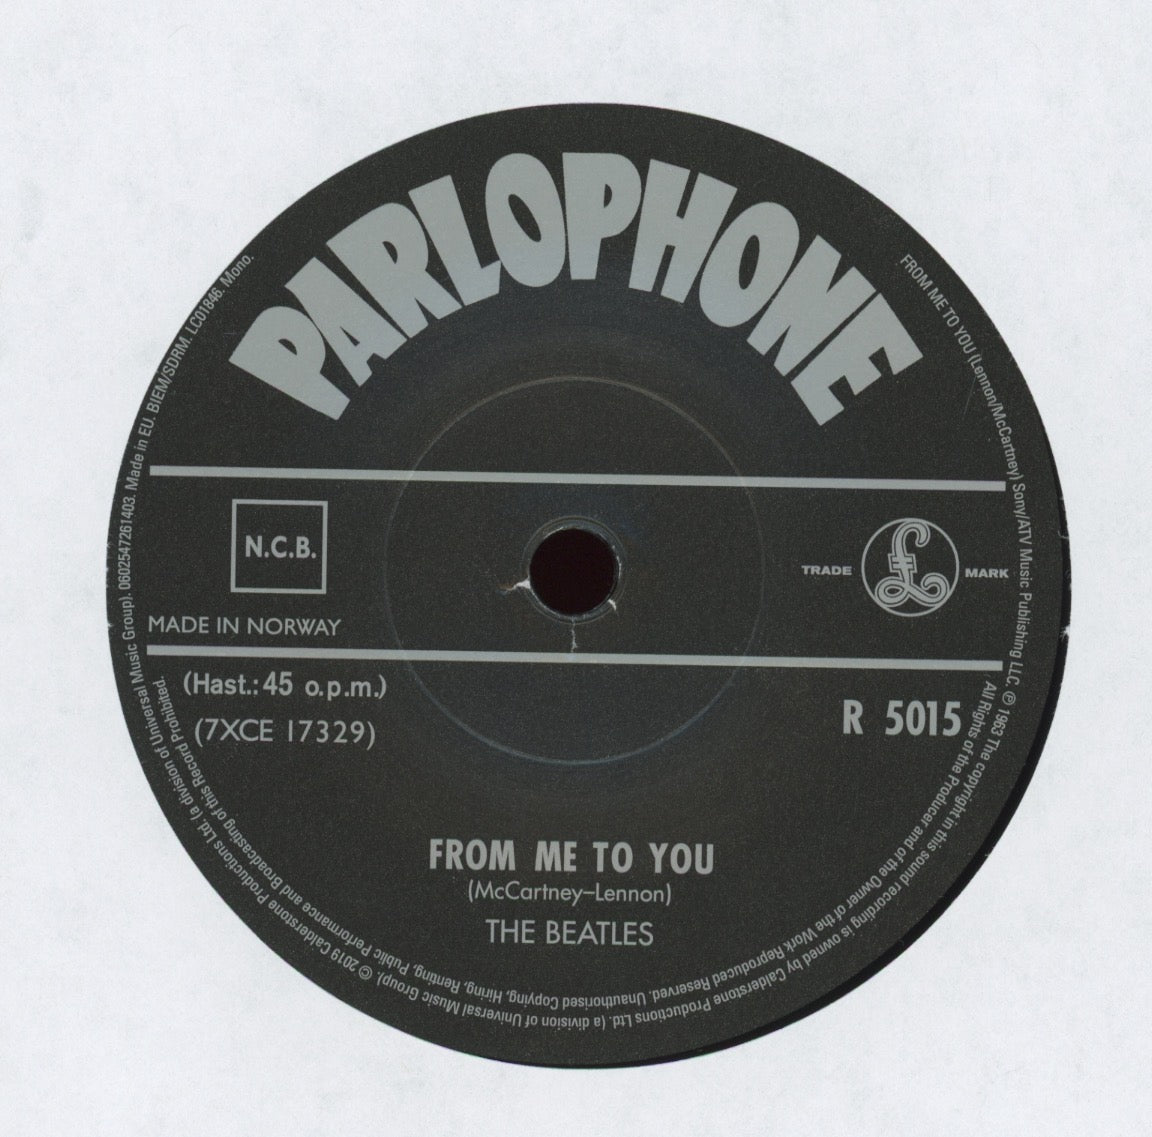 The Beatles - From Me To You / Thank You Girl on Parlophone 7" Reissue With Picture Cover